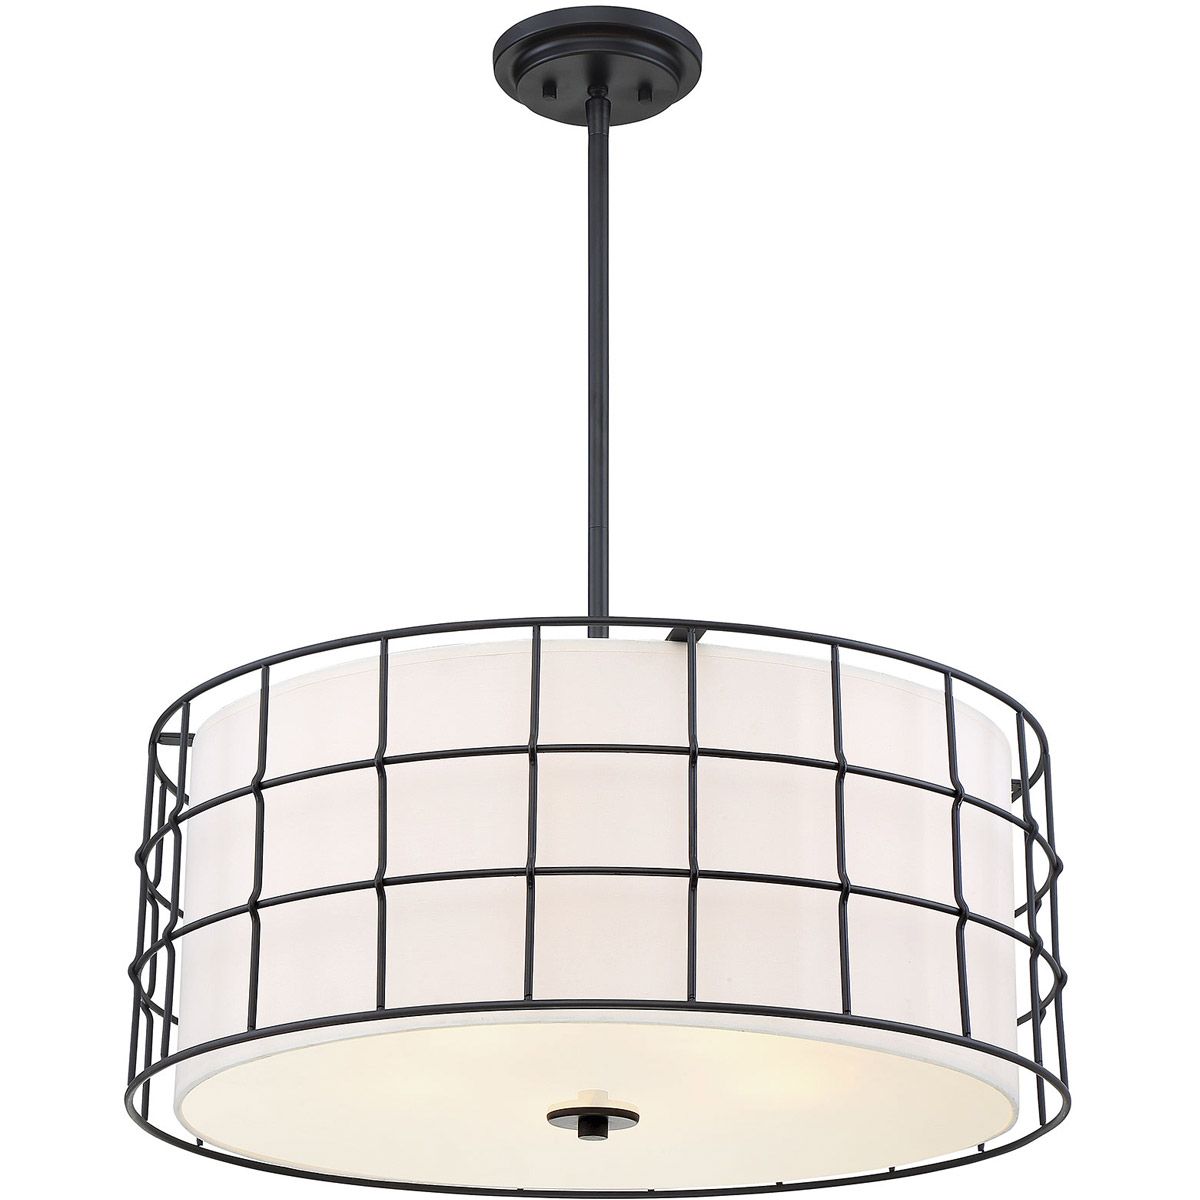 Details About Savoy House Lighting 7 8501 5 89 Hayden Pendant Black Within Hayden 5 Light Shaded Chandeliers (View 14 of 30)